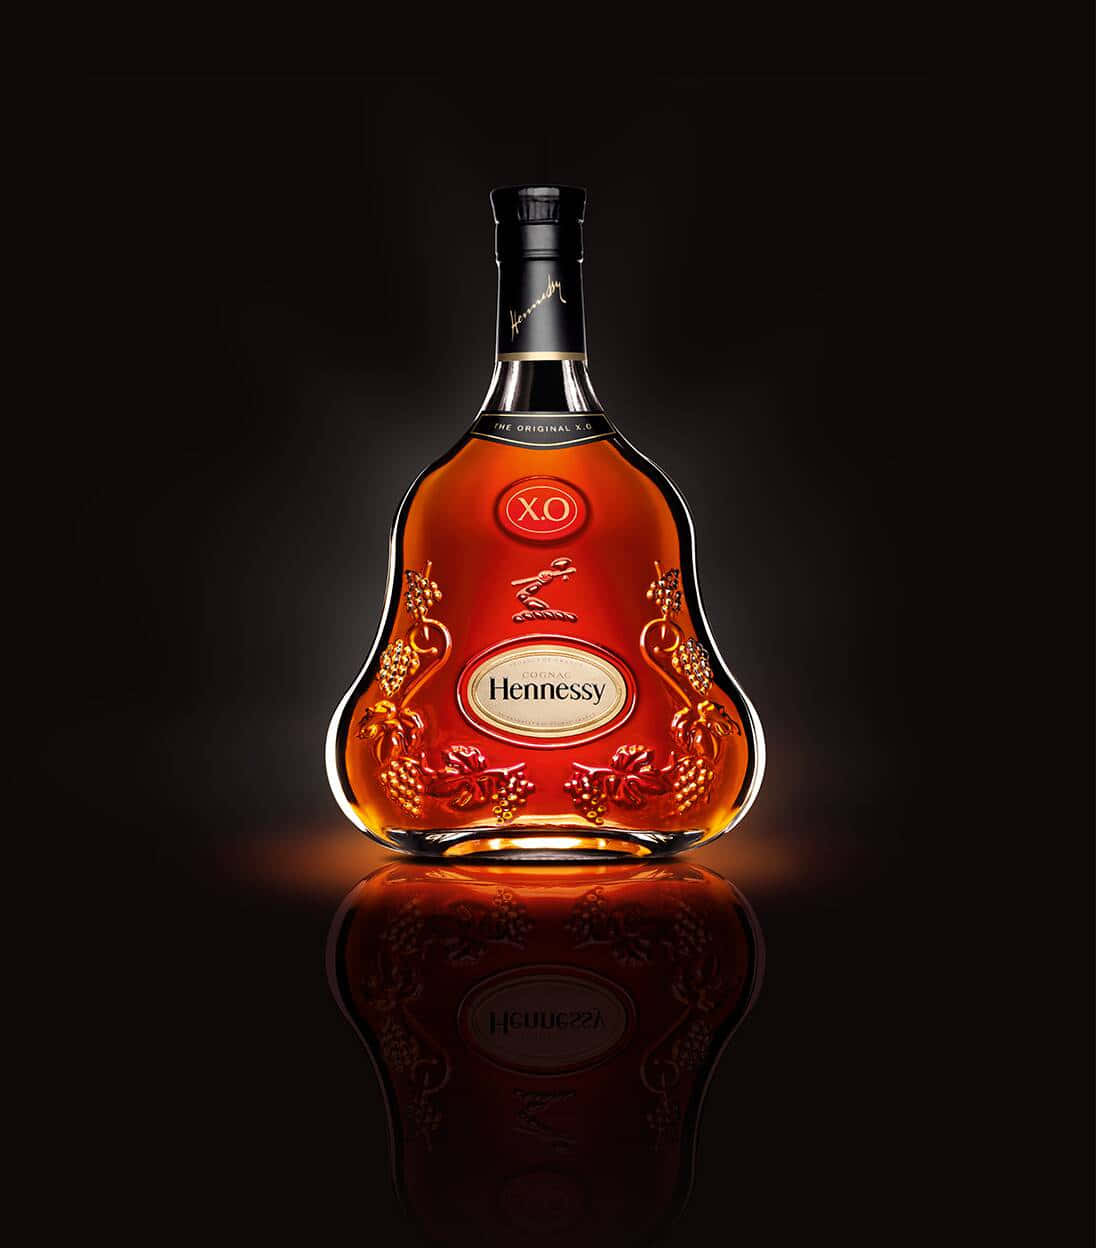 A Bottle Of Rum With A Black Background Wallpaper